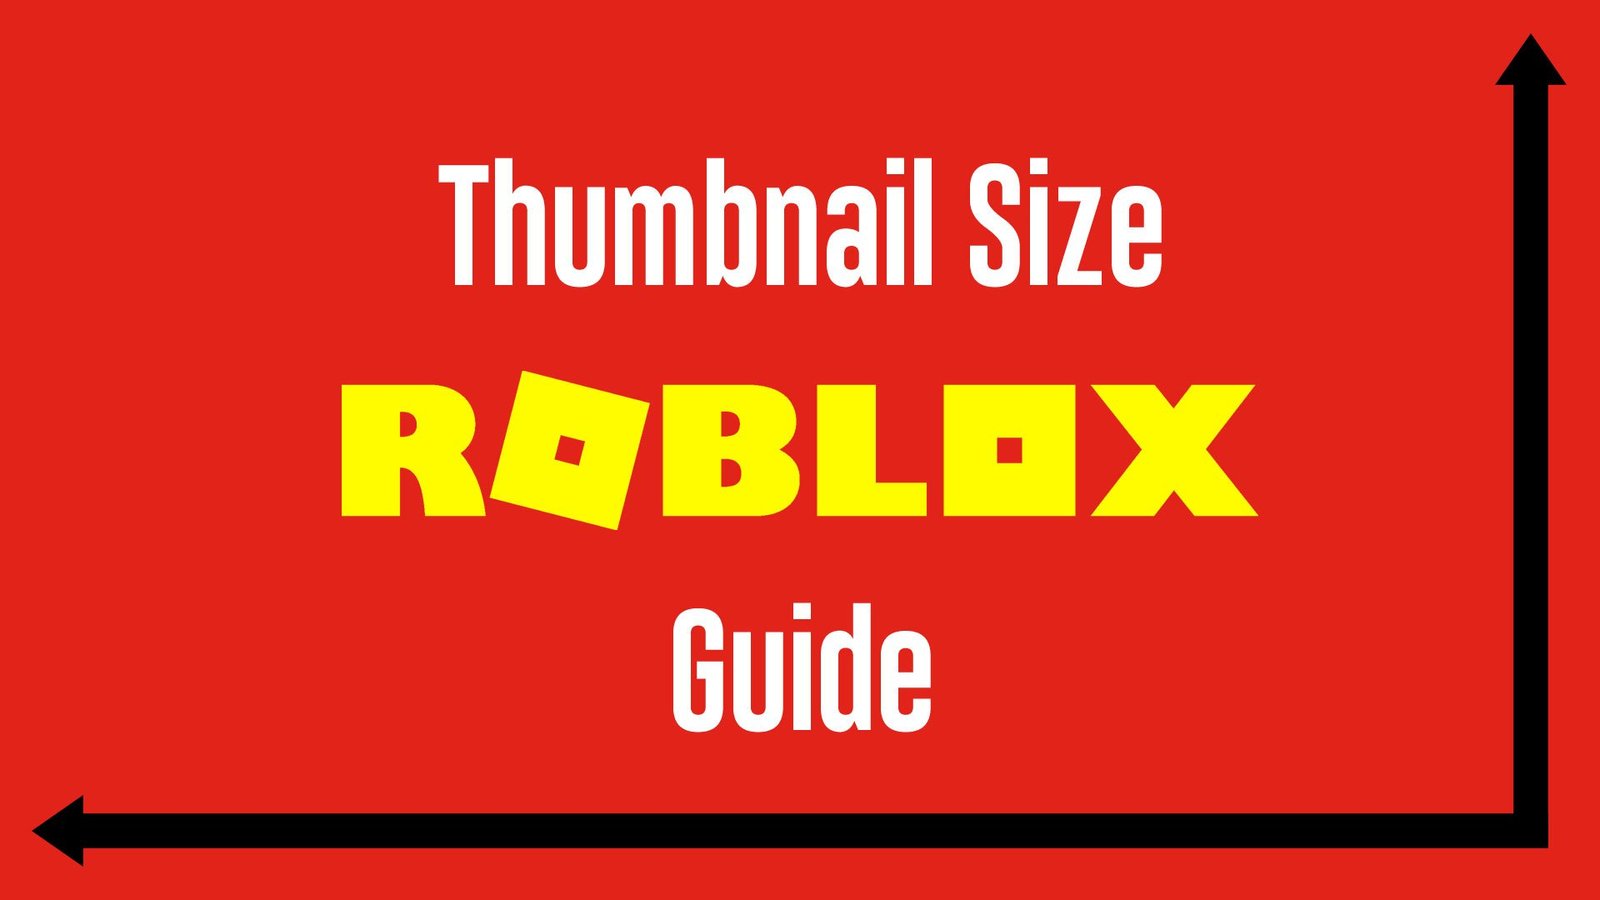 Everything You Need To Know About Roblox Thumbnail Size - roblox game image size